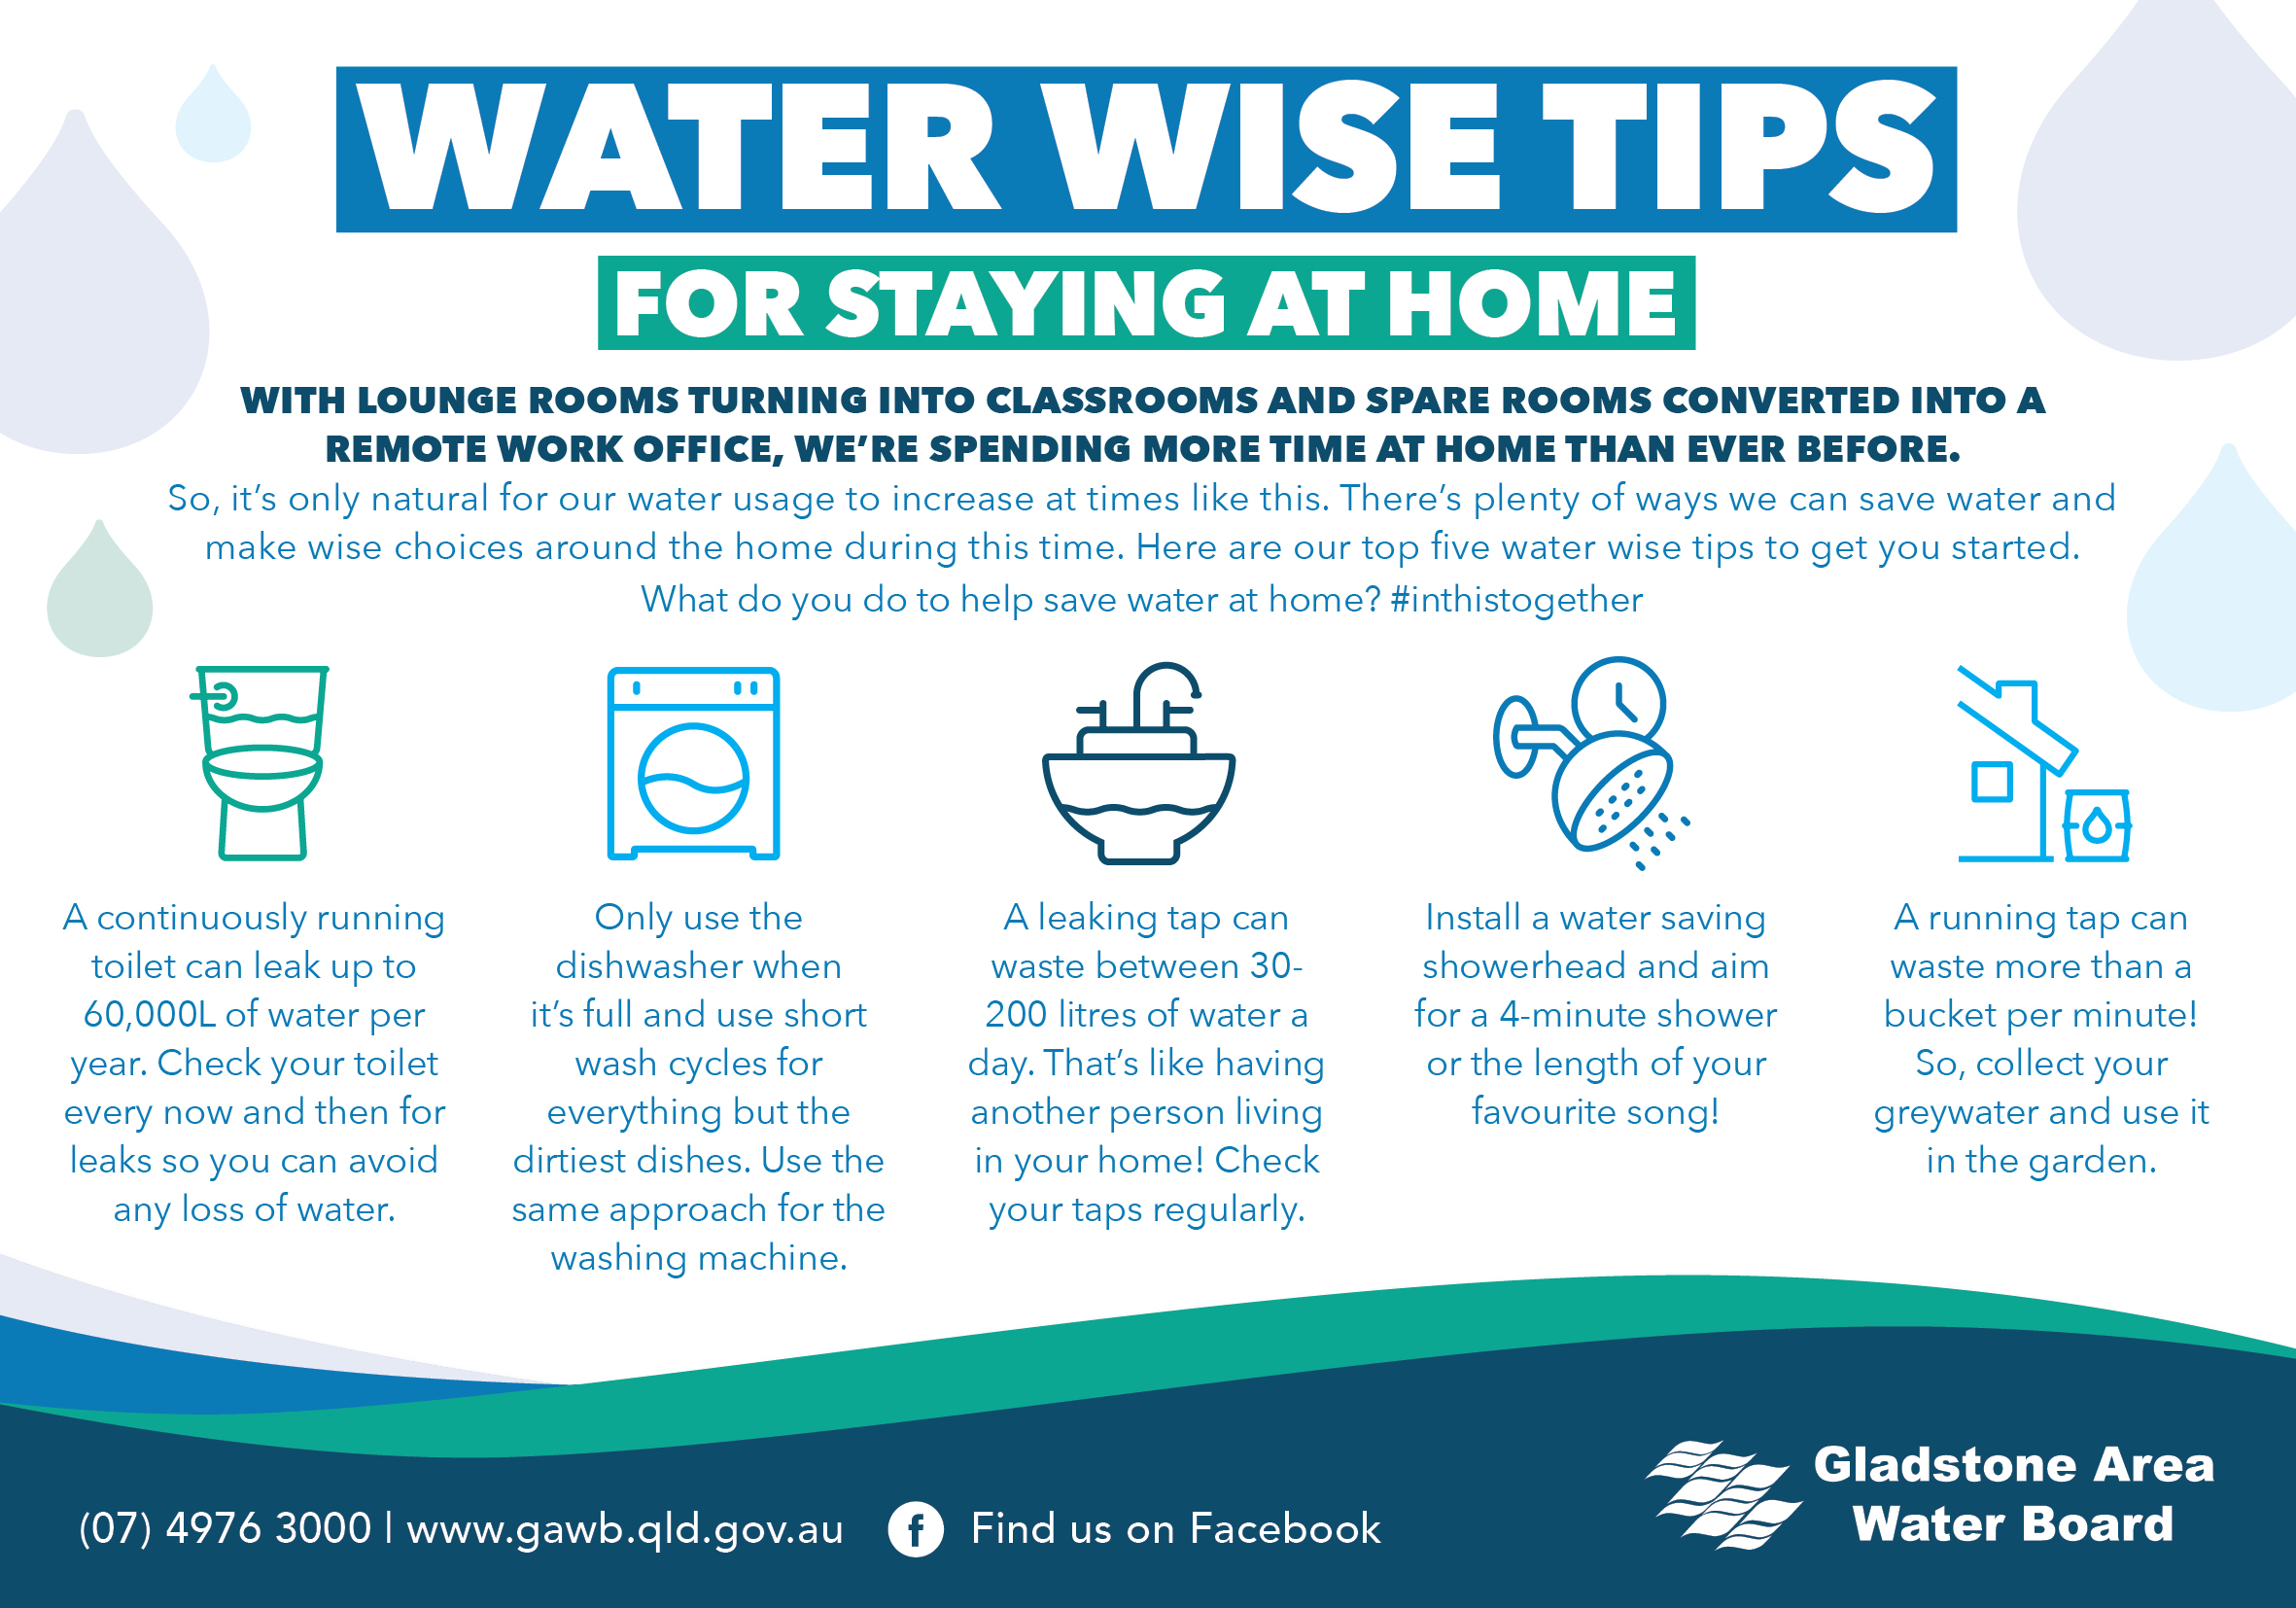 there-are-rebates-available-to-help-make-your-home-water-wise-water